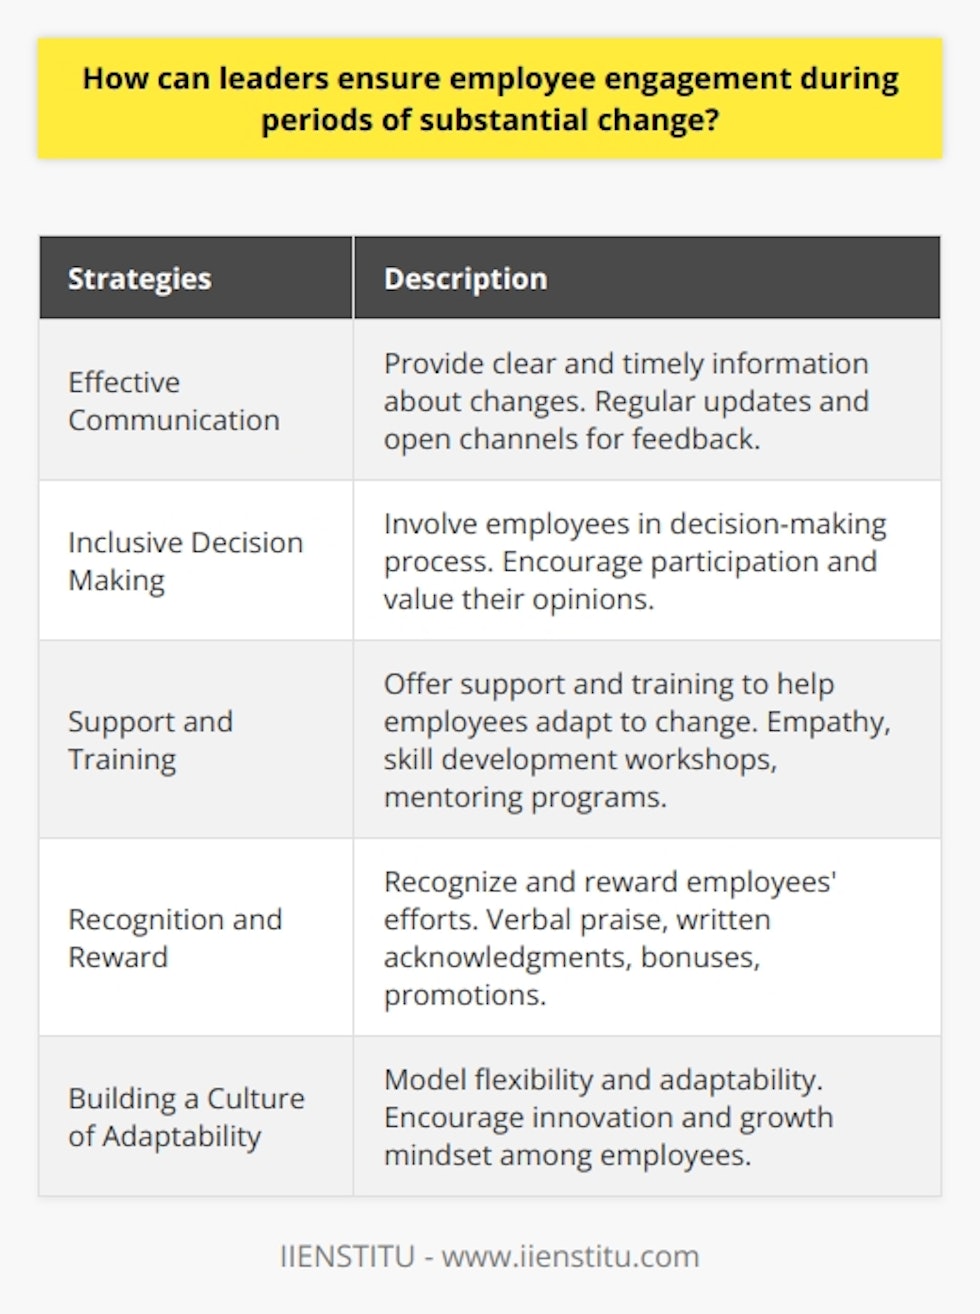 During periods of substantial change, leaders play a critical role in ensuring employee engagement. By implementing various strategies, such as effective communication, inclusive decision making, support and training, recognition and reward, and building a culture of adaptability, leaders can successfully navigate their teams through these challenging transitions.One of the most crucial strategies is effective communication. Leaders should provide clear and timely information about the changes happening within the organization. This helps to reduce uncertainty and uneasiness among employees. Regular updates and open channels for feedback create trust and promote a sense of shared purpose among the employees.Inclusive decision making is another important strategy. By involving employees in the decision-making process, leaders demonstrate that their opinions are valued. Employees who feel that they have a role in shaping the change are more likely to embrace it and remain committed to the organization. Leaders can encourage participation by actively soliciting feedback, hosting brainstorming sessions, and creating cross-functional teams to address specific aspects of the change.During times of change, leaders must also provide support and training to help employees adapt to the new reality. This may involve offering skill development workshops, implementing mentoring programs, or even reassigning employees to different roles within the organization. By showing empathy and understanding when employees face challenges, leaders can create a positive work environment that encourages resilience and problem-solving.Recognizing and rewarding employees' efforts during periods of change is another important strategy. Leaders should express their appreciation for employees' hard work and dedication through verbal praise, written acknowledgments, or tangible rewards such as bonuses or promotions. By celebrating employees' achievements, leaders send a clear message that their contributions in navigating the change are valued and recognized.Finally, leaders should focus on building a culture of adaptability within the organization. This involves modeling flexibility and adaptability in their own behavior, encouraging innovation, and promoting a growth mindset among employees. In such an environment, employees are more likely to embrace change as an opportunity for growth and learning, rather than as a threat to their job security. This culture of adaptability helps to ensure sustained employee engagement during periods of substantial change.In conclusion, leaders can ensure employee engagement during times of substantial change by implementing strategies such as effective communication, inclusive decision making, support and training, recognition and reward, and building a culture of adaptability. By prioritizing these strategies, leaders can successfully guide their teams through challenging transitions while maintaining high levels of engagement and productivity.